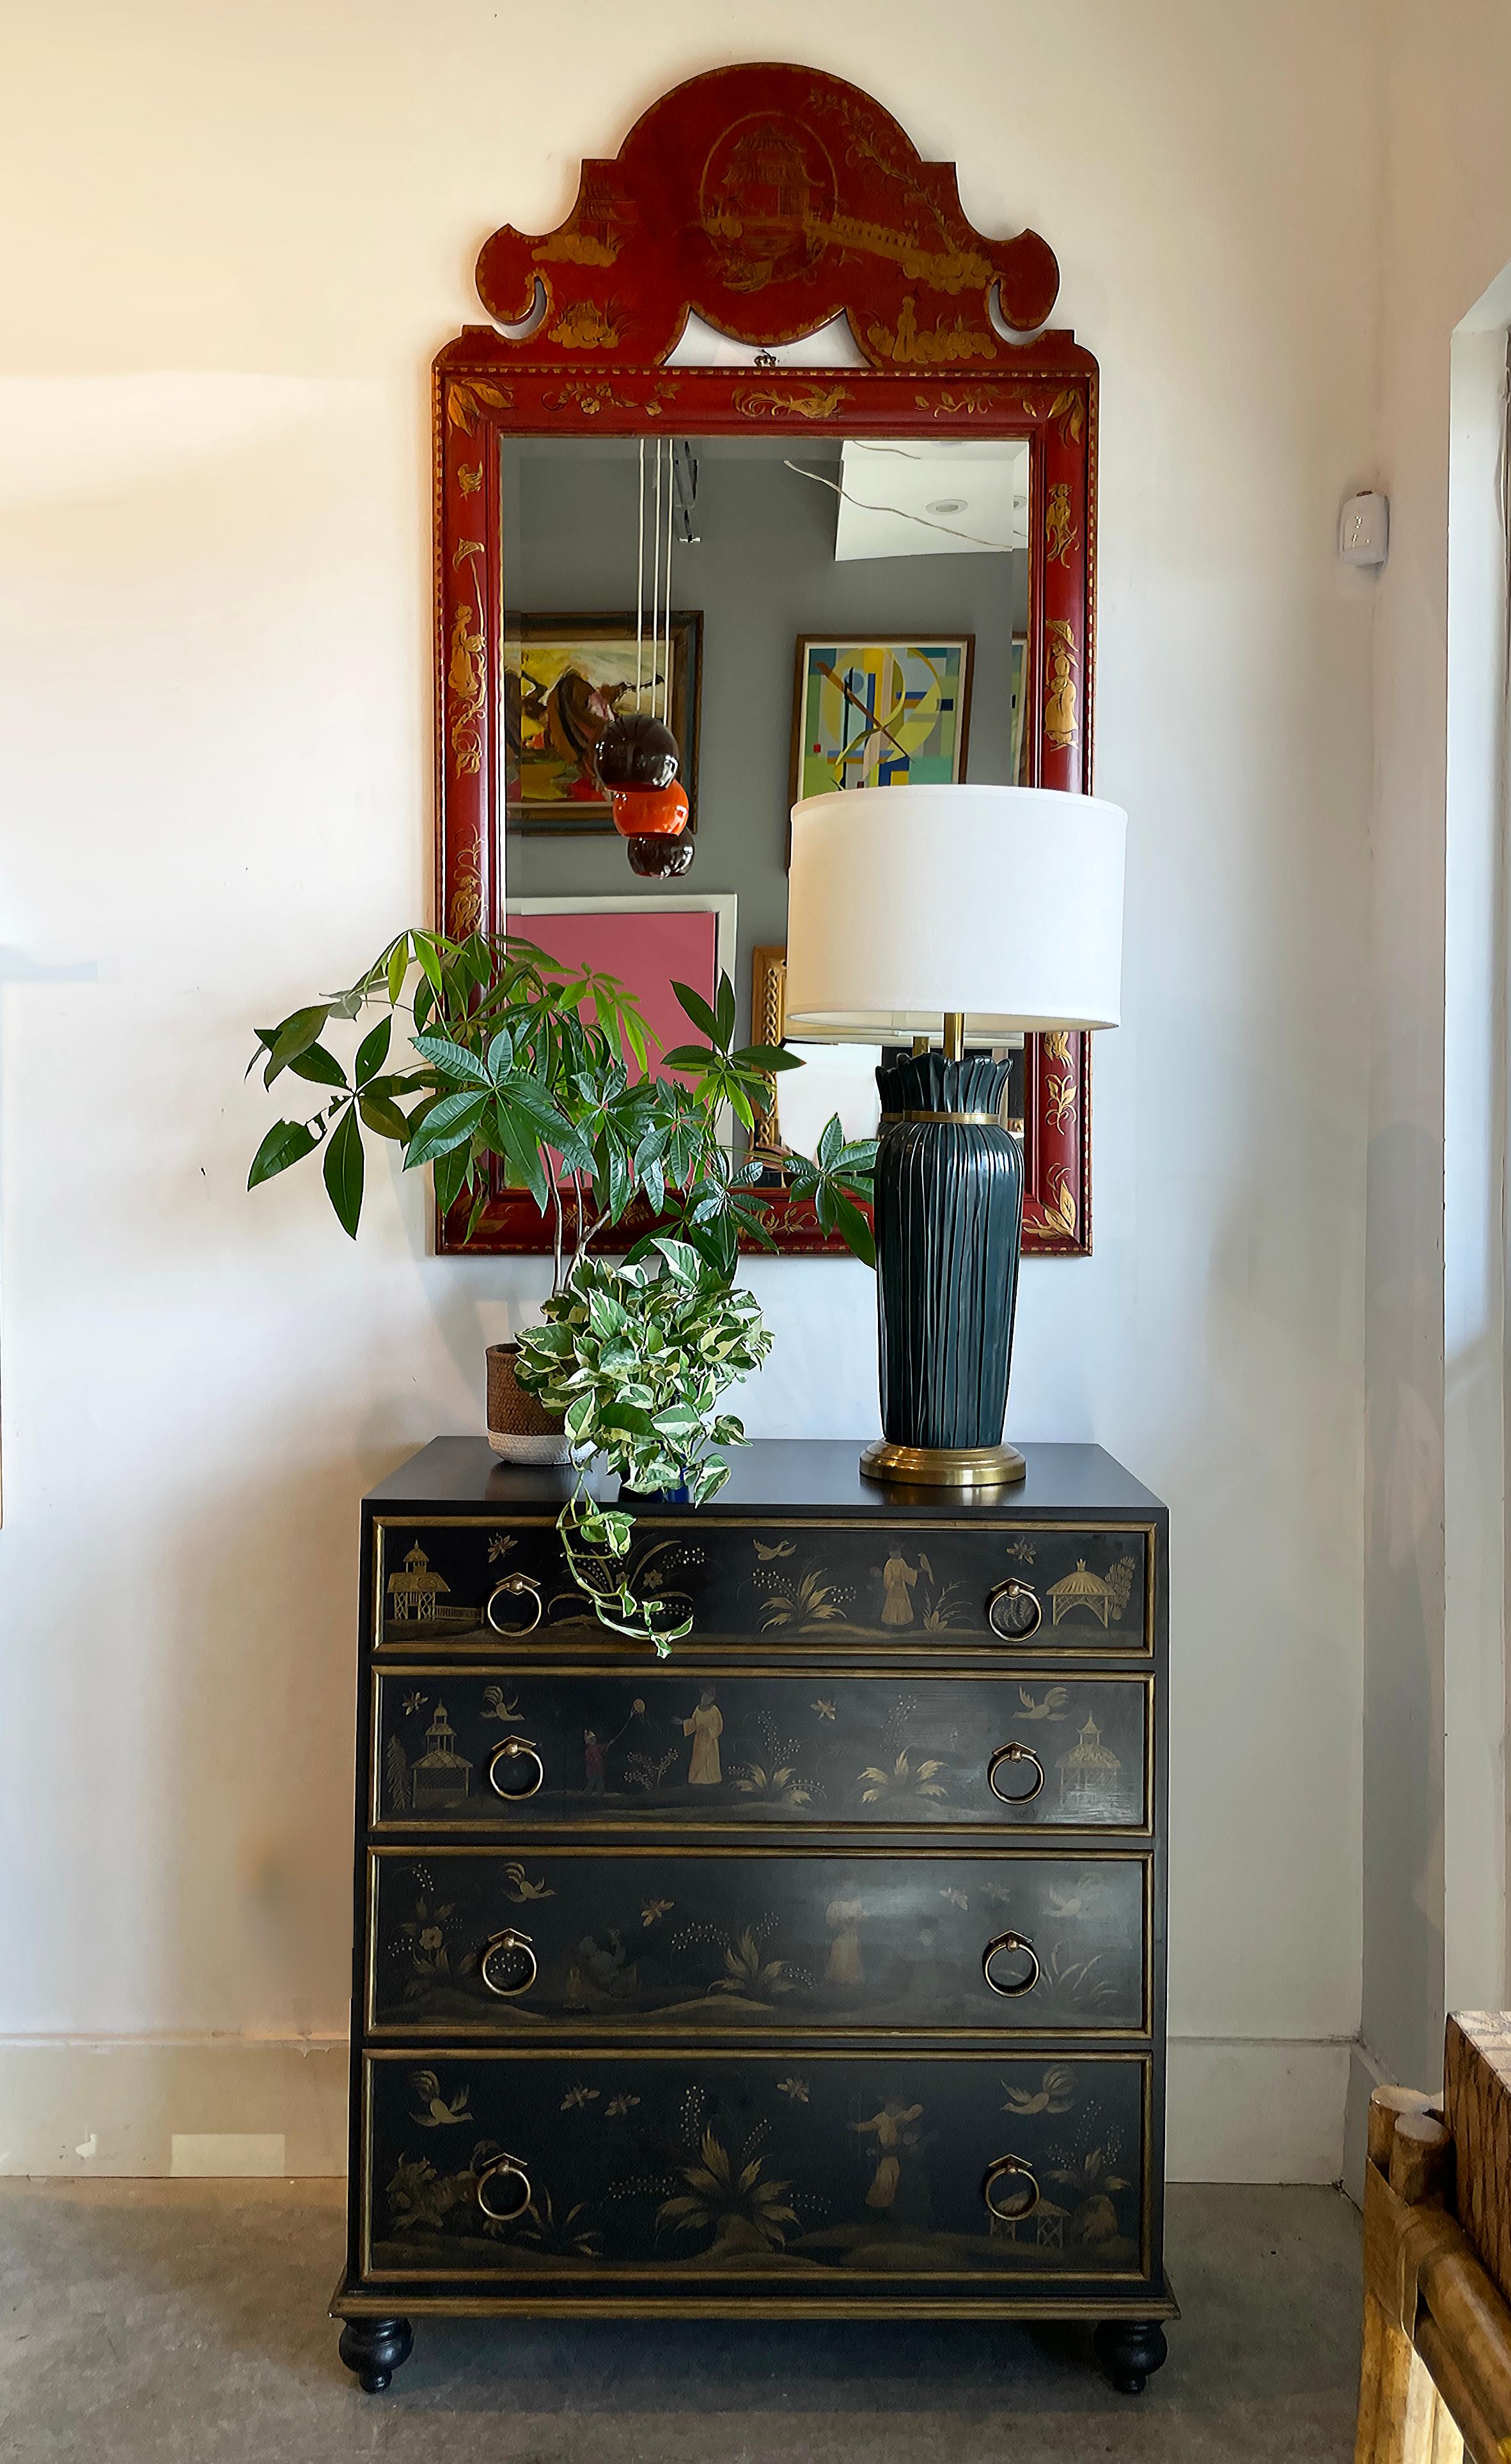 Vintage 1980s hand-painted Chinoiserie cabinet Chest of drawers

Offered for sale is a vintage 1980s hand-painted Chinoiserie-style cabinet with great details and lovely brass hardware. The chest is quite elegant with black and gold themes